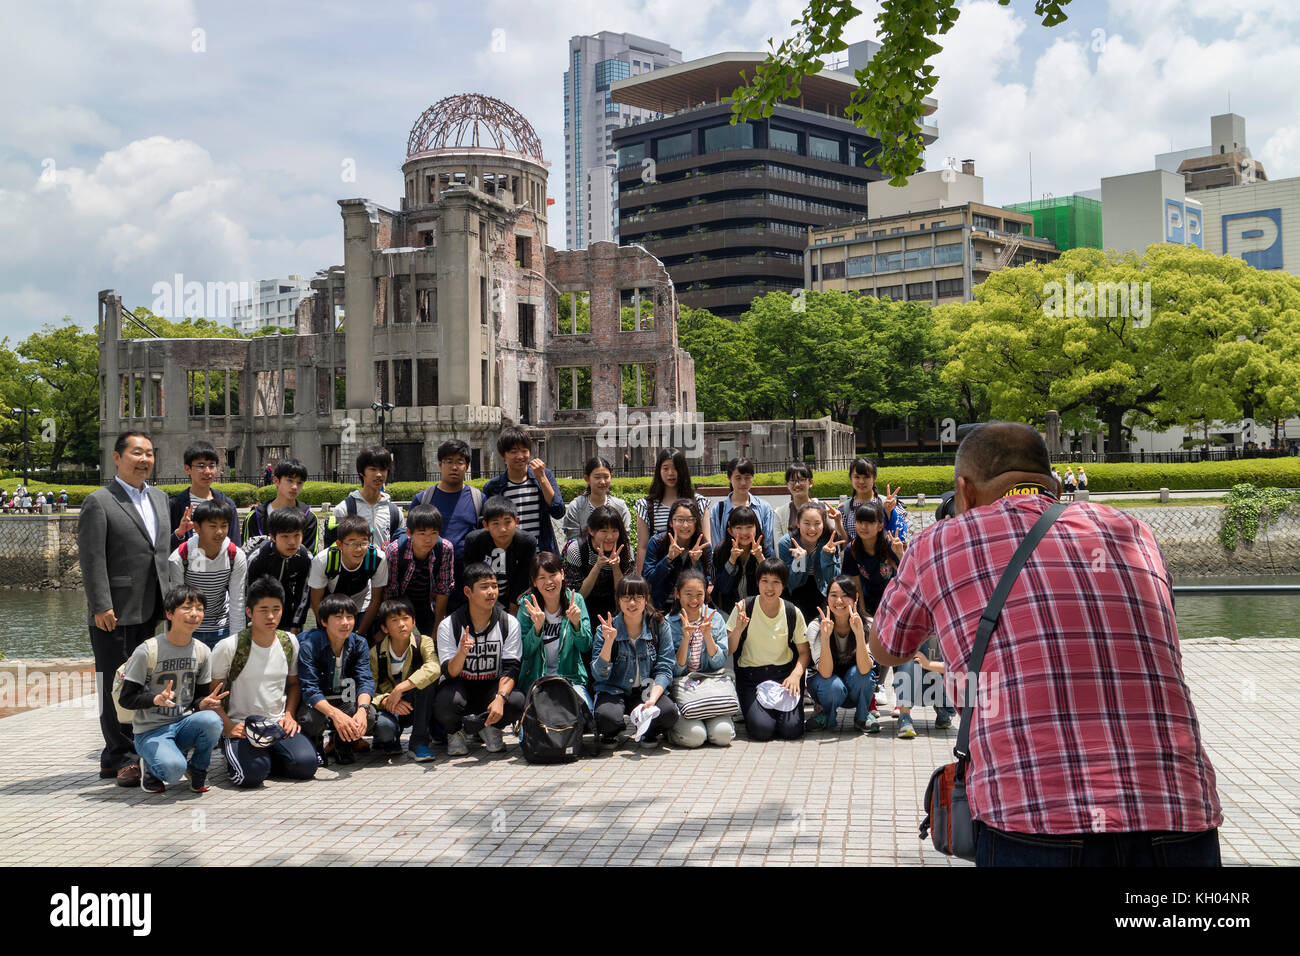 Hiroshima, Japan - May 25, 2017: Group of Students is photographed in Peace Memorial Park, Hiroshima with the A-Bomb Dome in the background Stock Photo